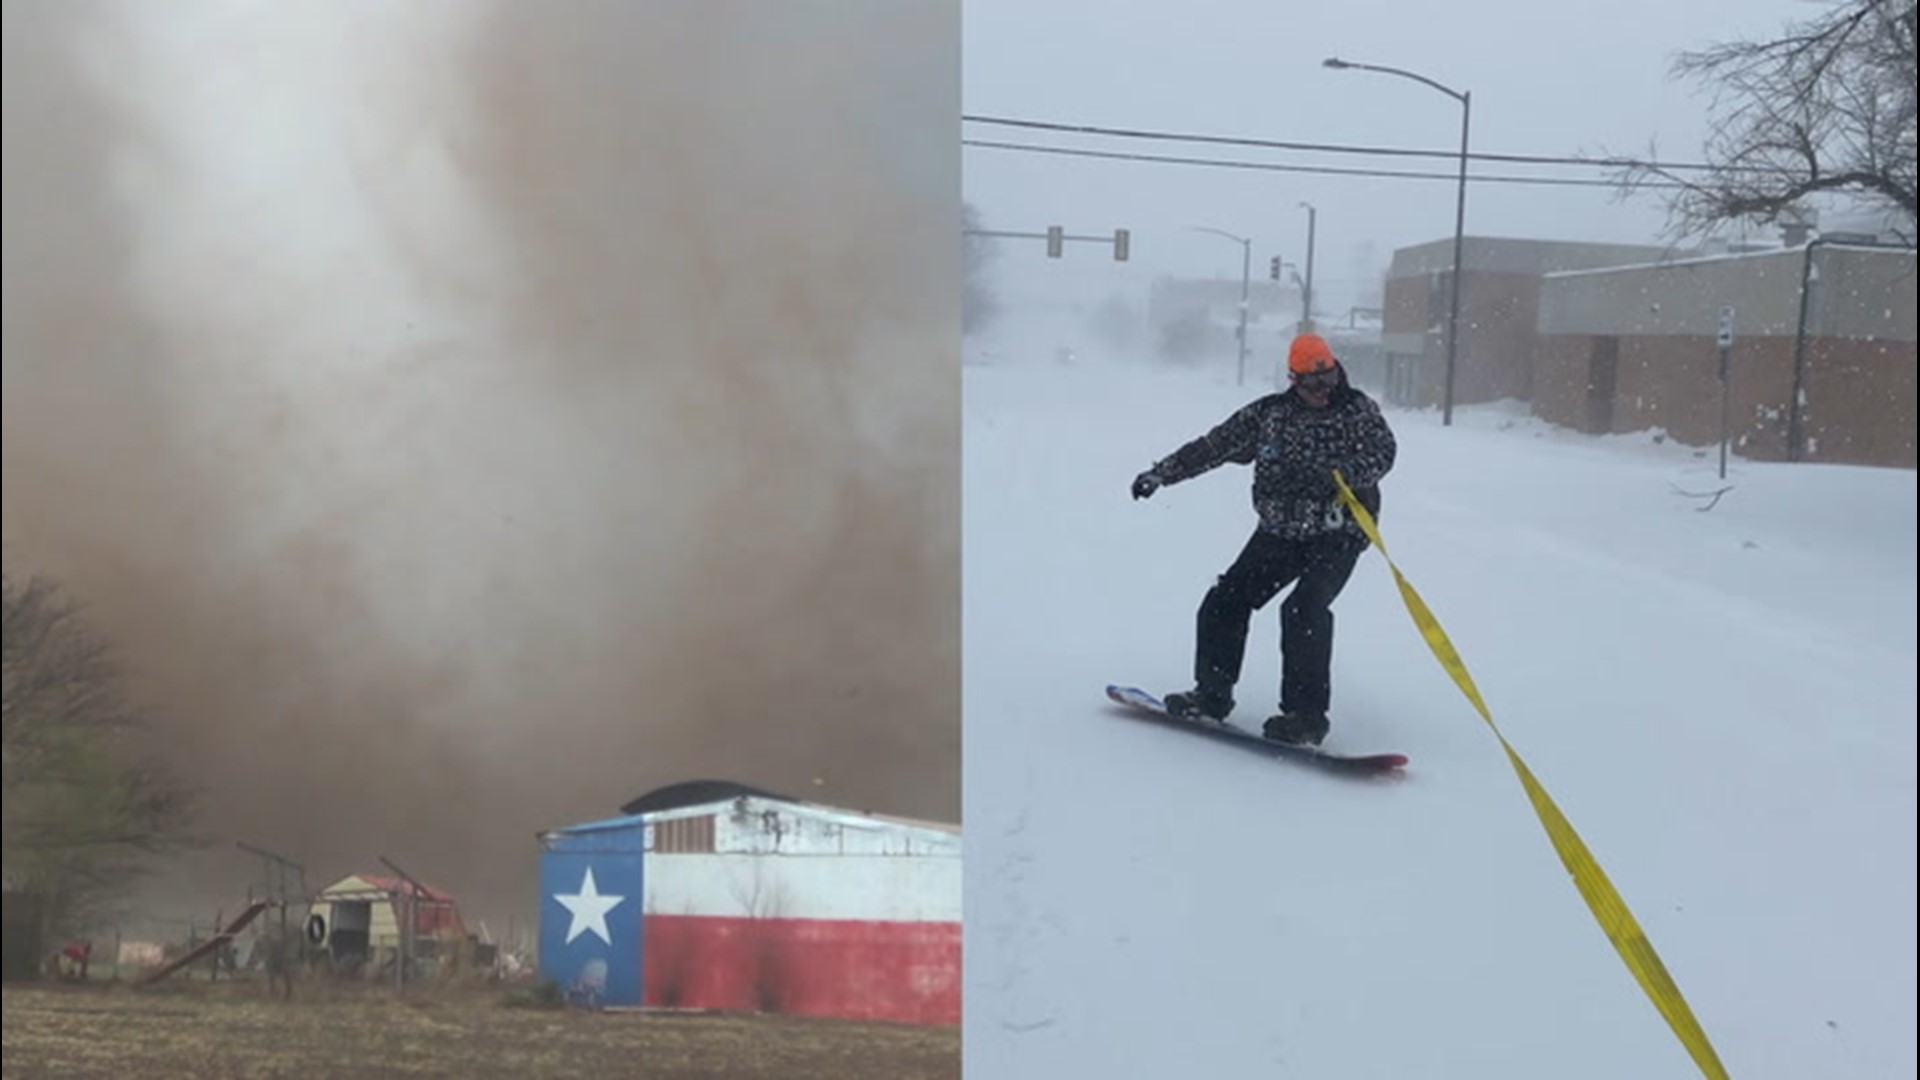 Parts of Texas were hit with tornadoes while a major snowstorm blanketed Colorado and Wyoming over the weekend of March 13-14.